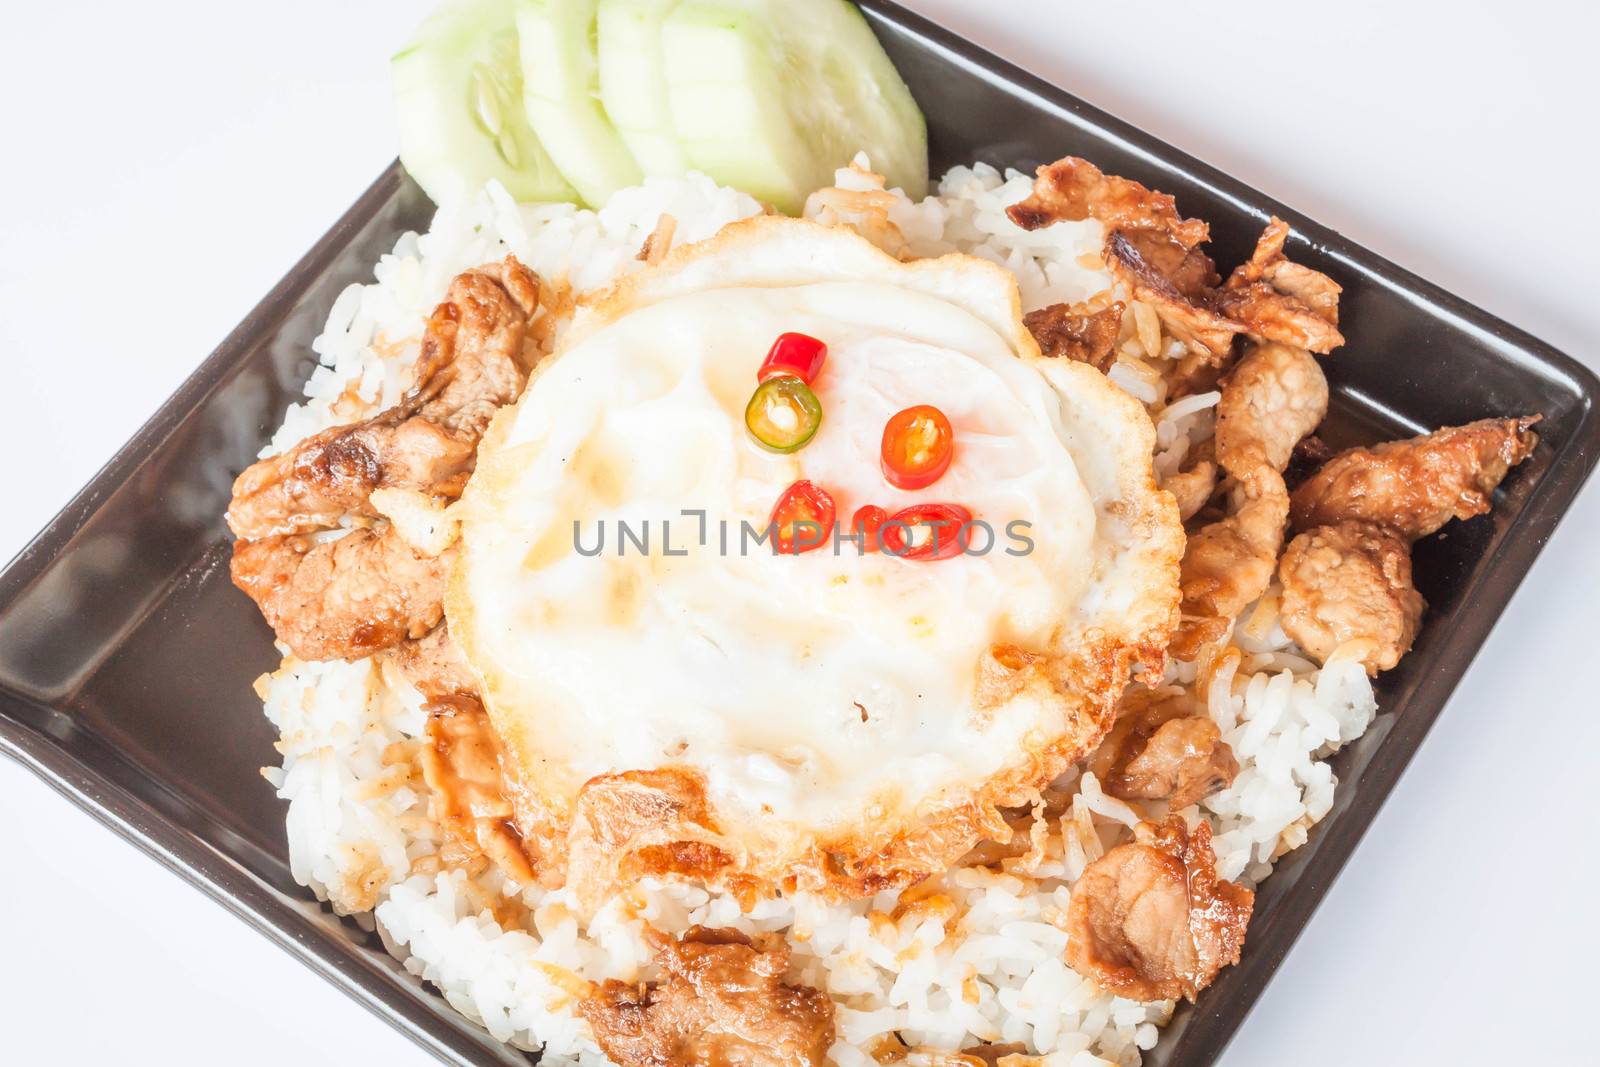 Egg fried and fried pork garlic with soy sauce topped on rice by punsayaporn